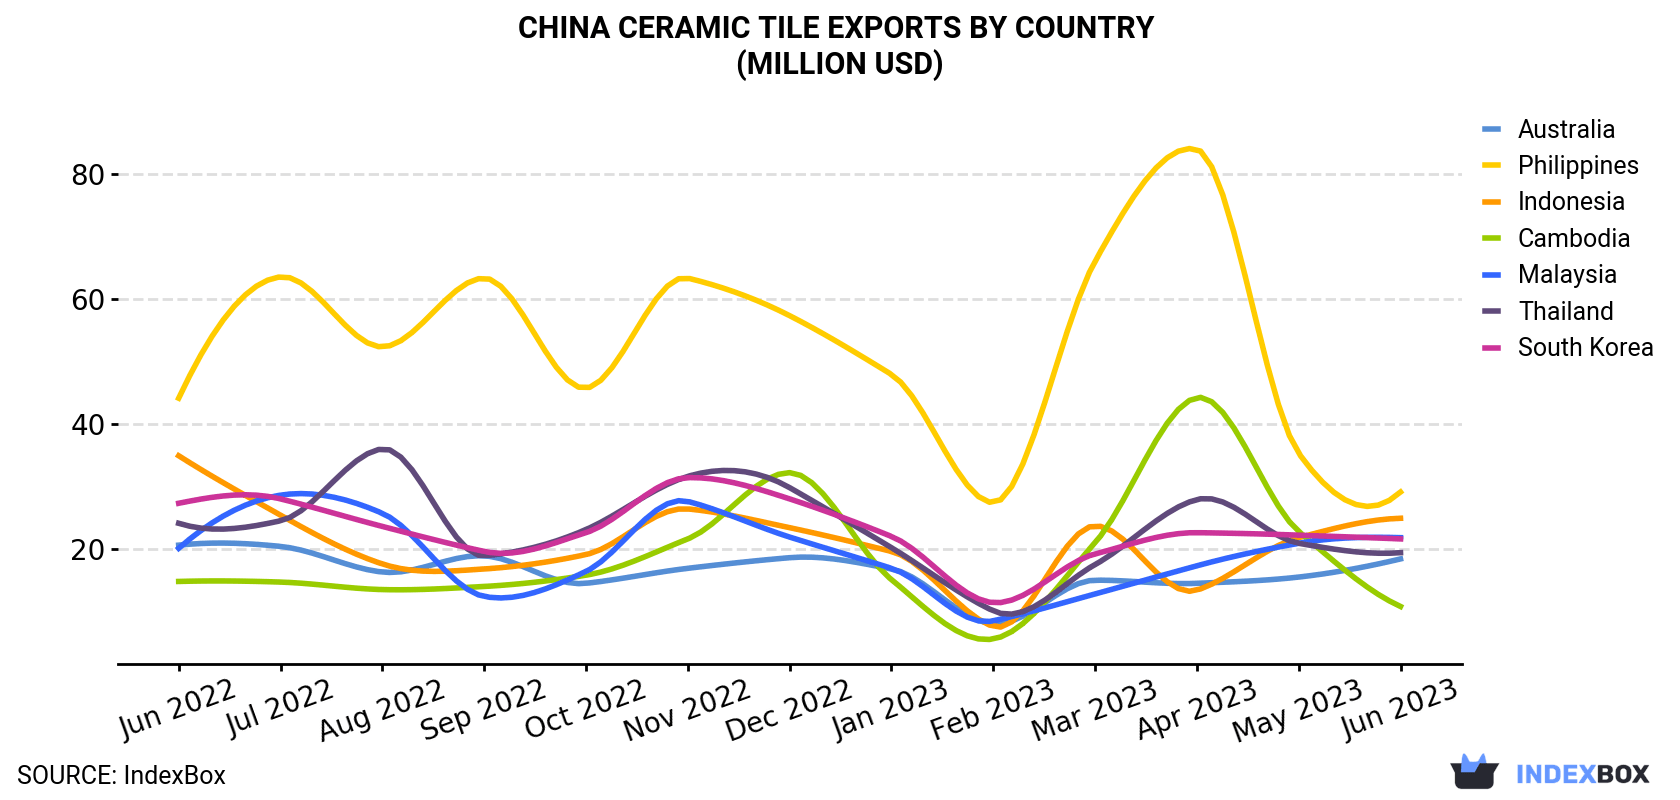 China Ceramic Tile Exports By Country (Million USD)